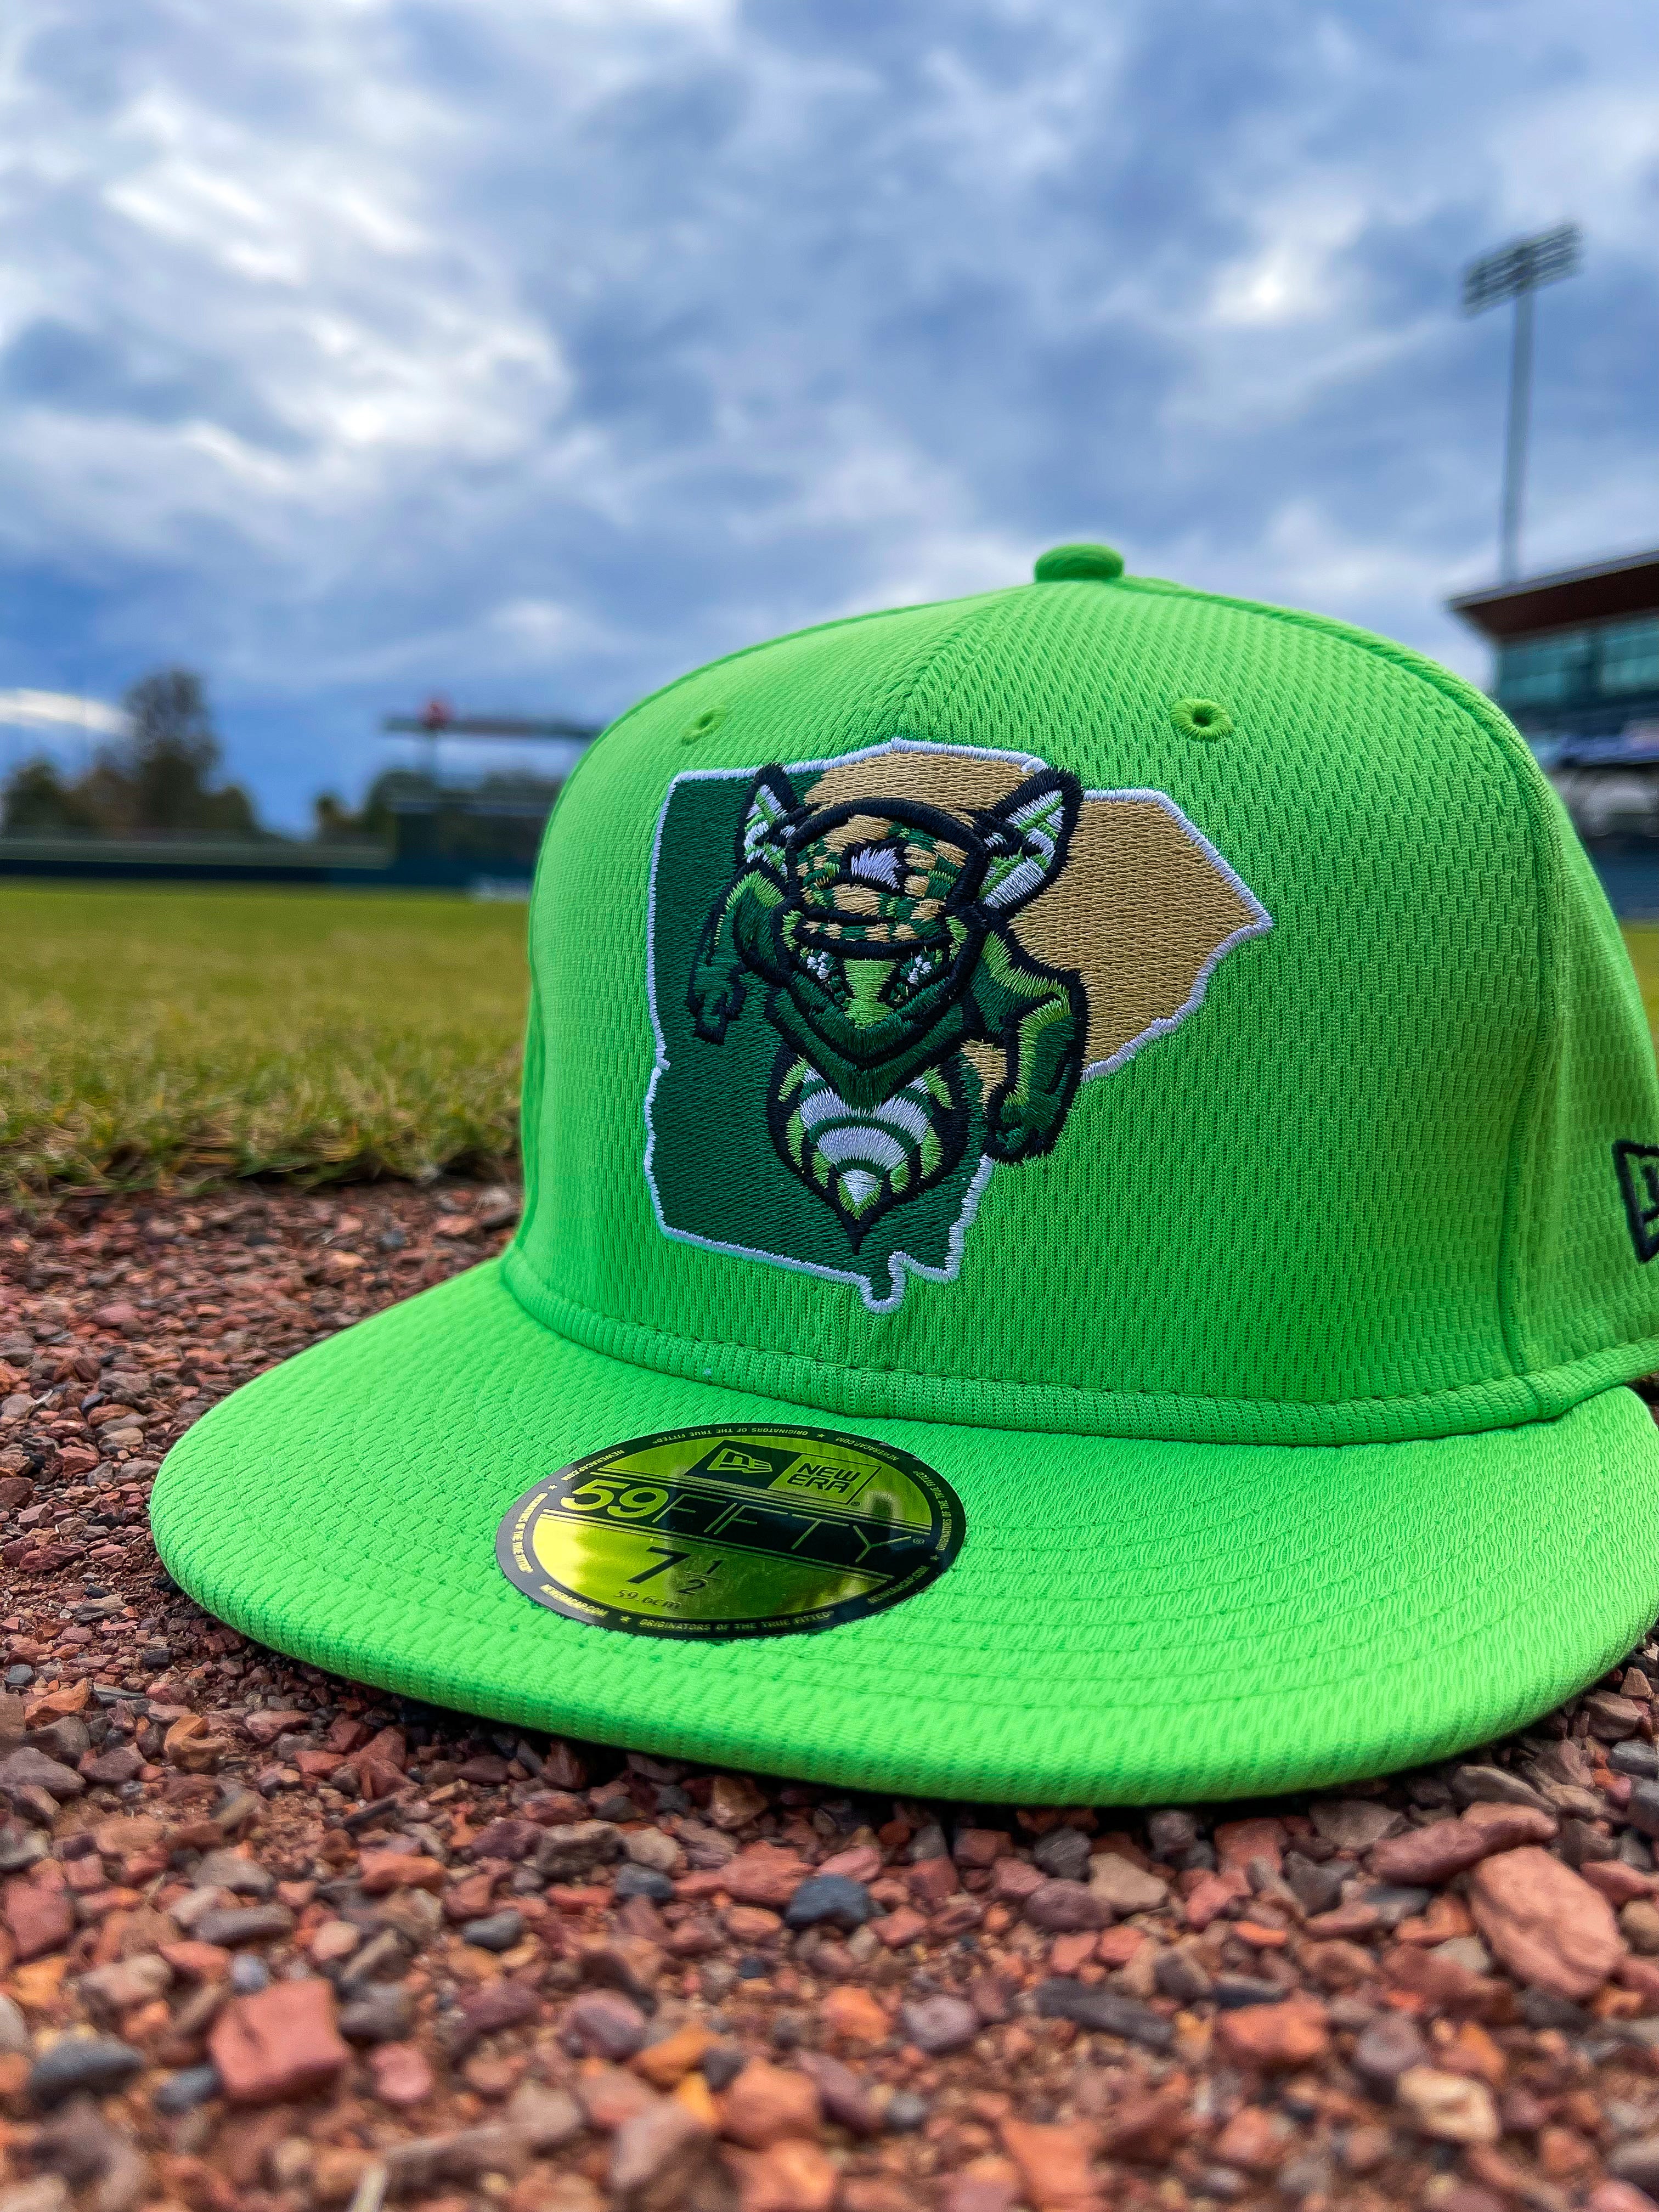 🚨FOR IMMEDIATE RELEASE🚨 Your 2019 - Augusta GreenJackets